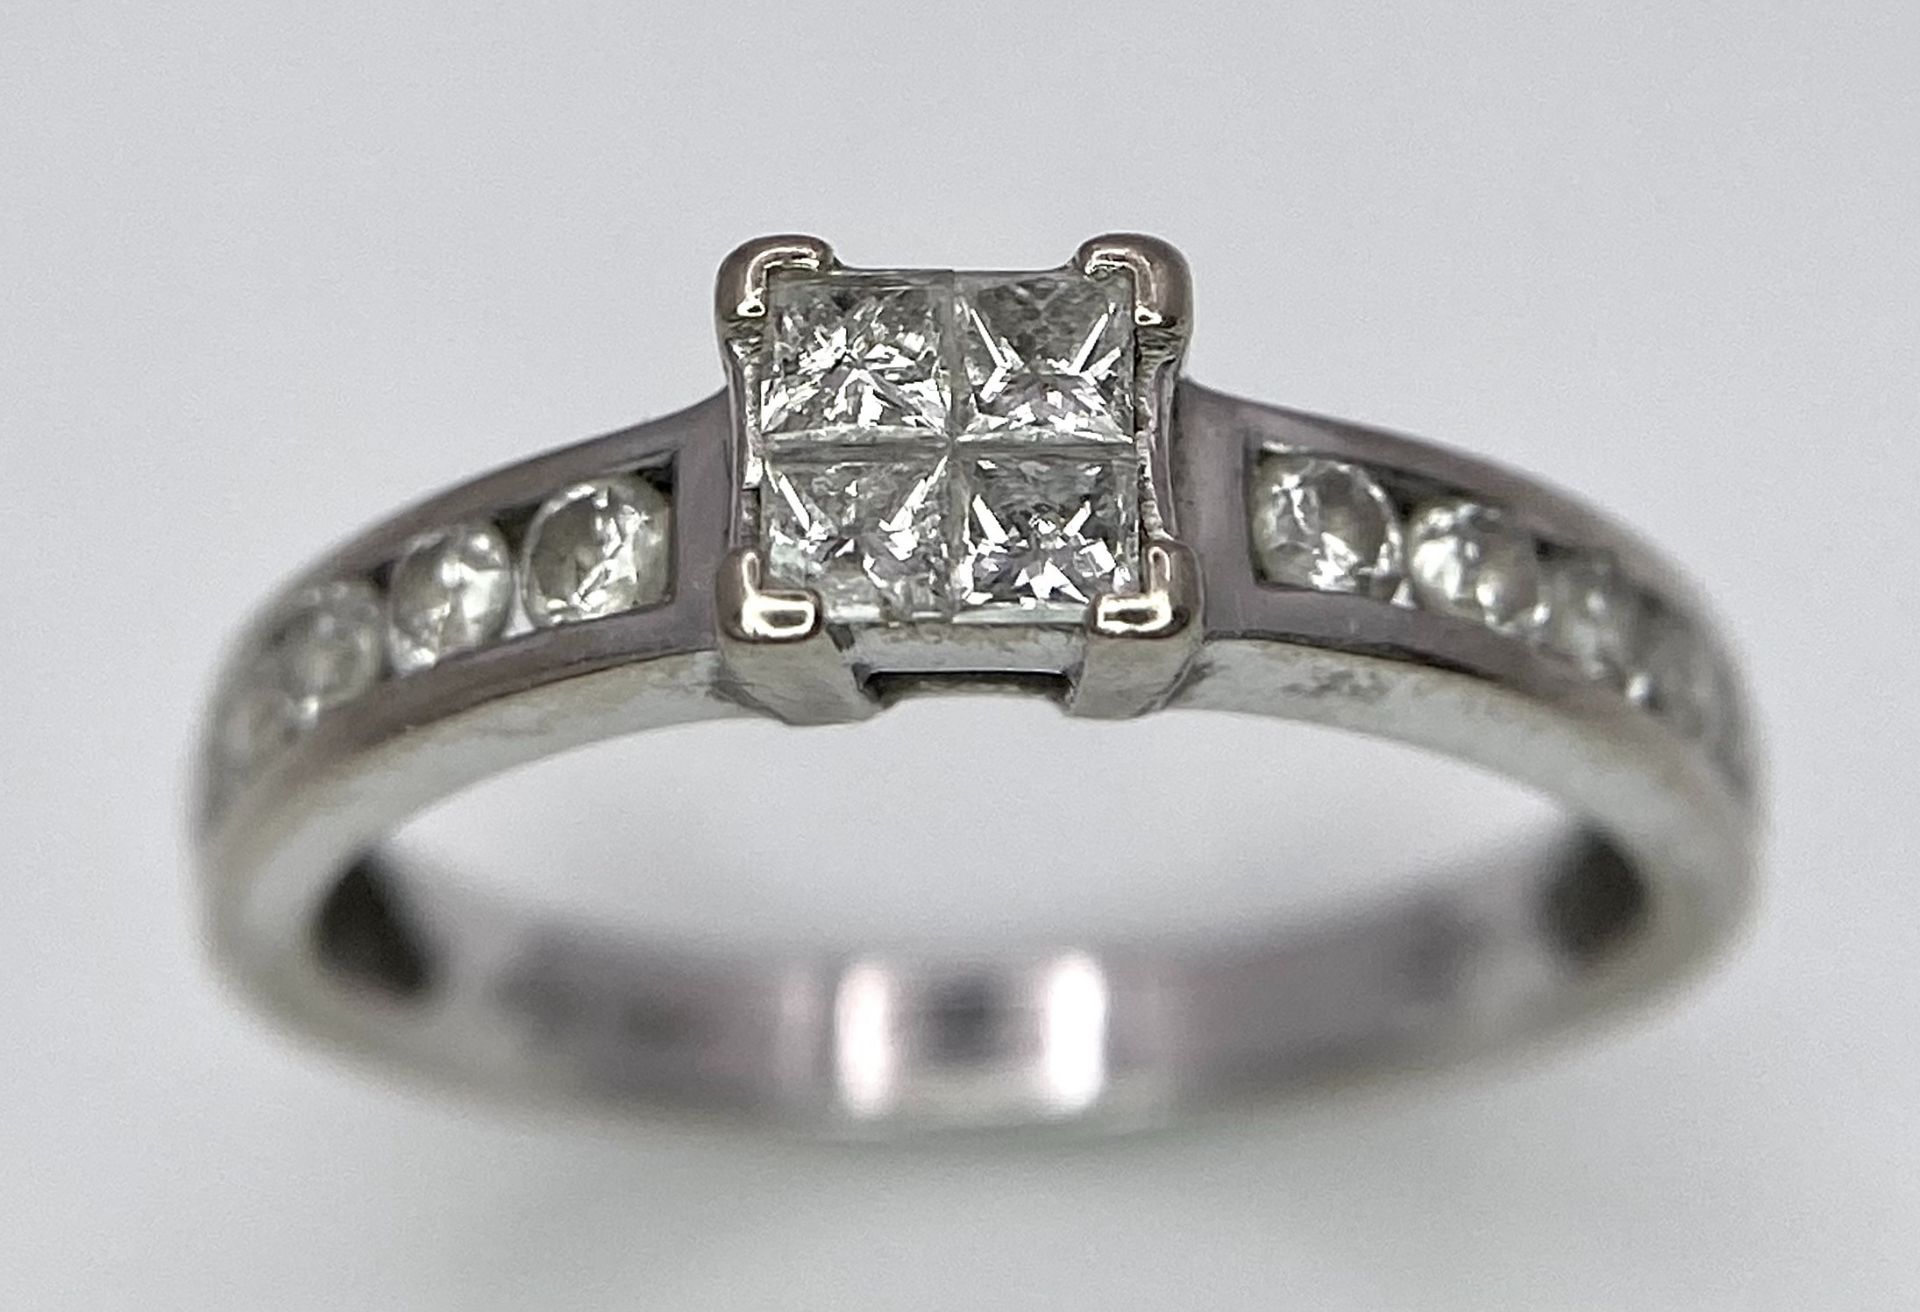 An 18K White Gold and Diamond Ring. Square and round cut diamonds. Size J. 2.6g total weight. - Image 2 of 7